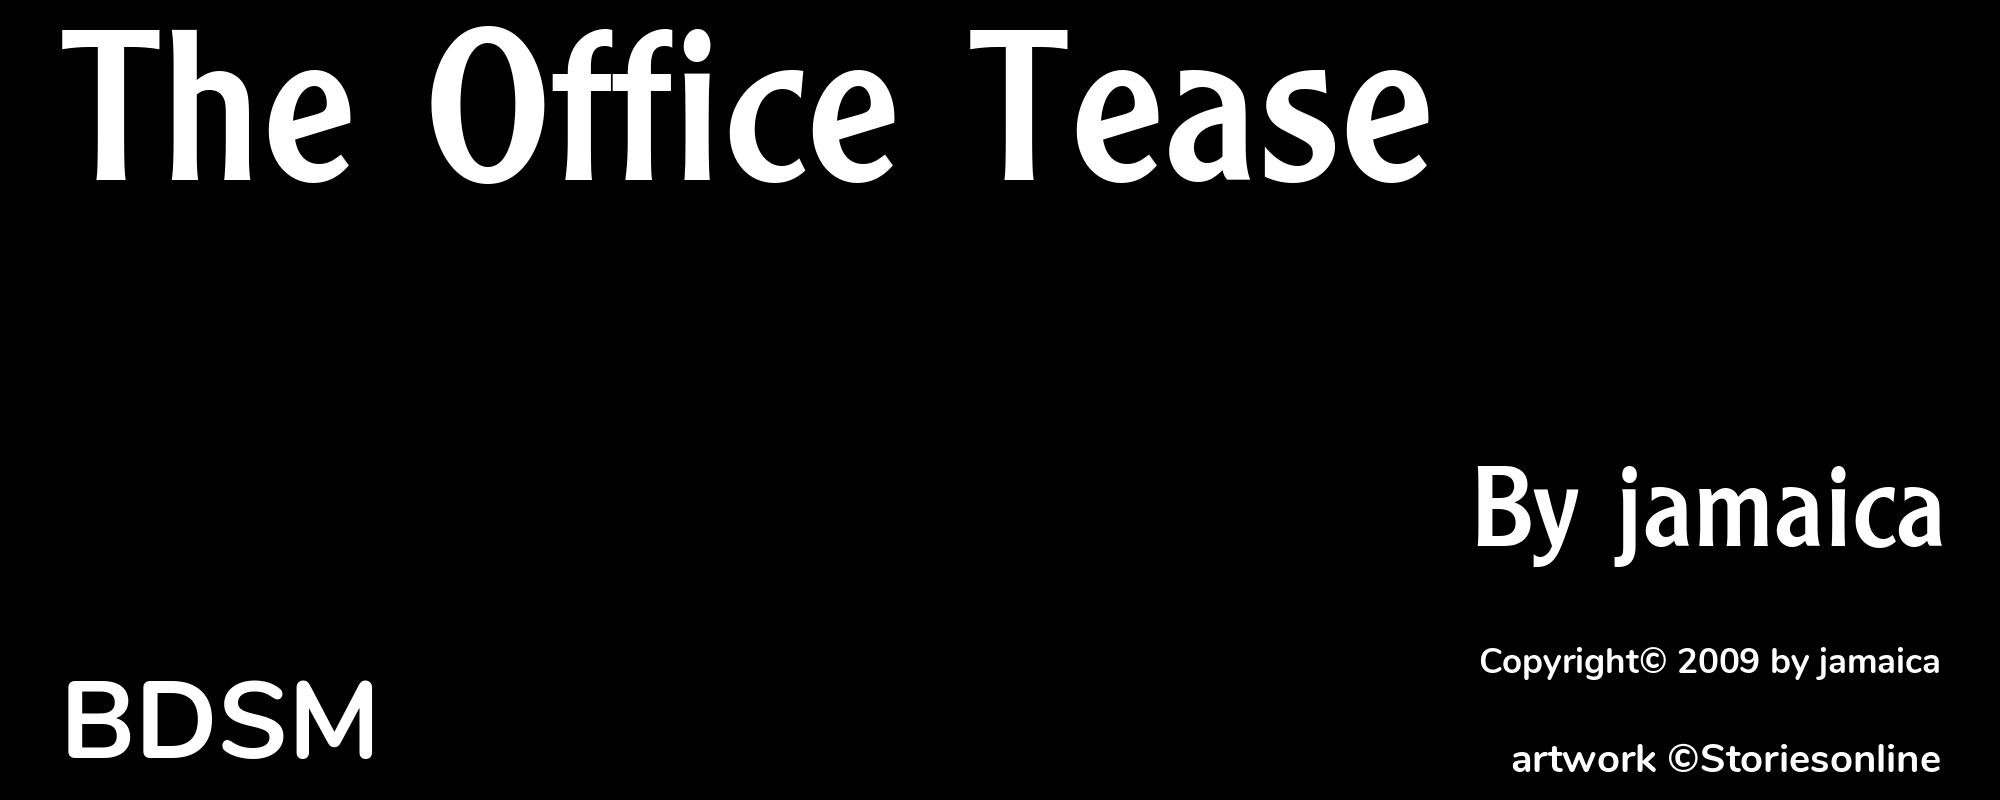 The Office Tease - Cover